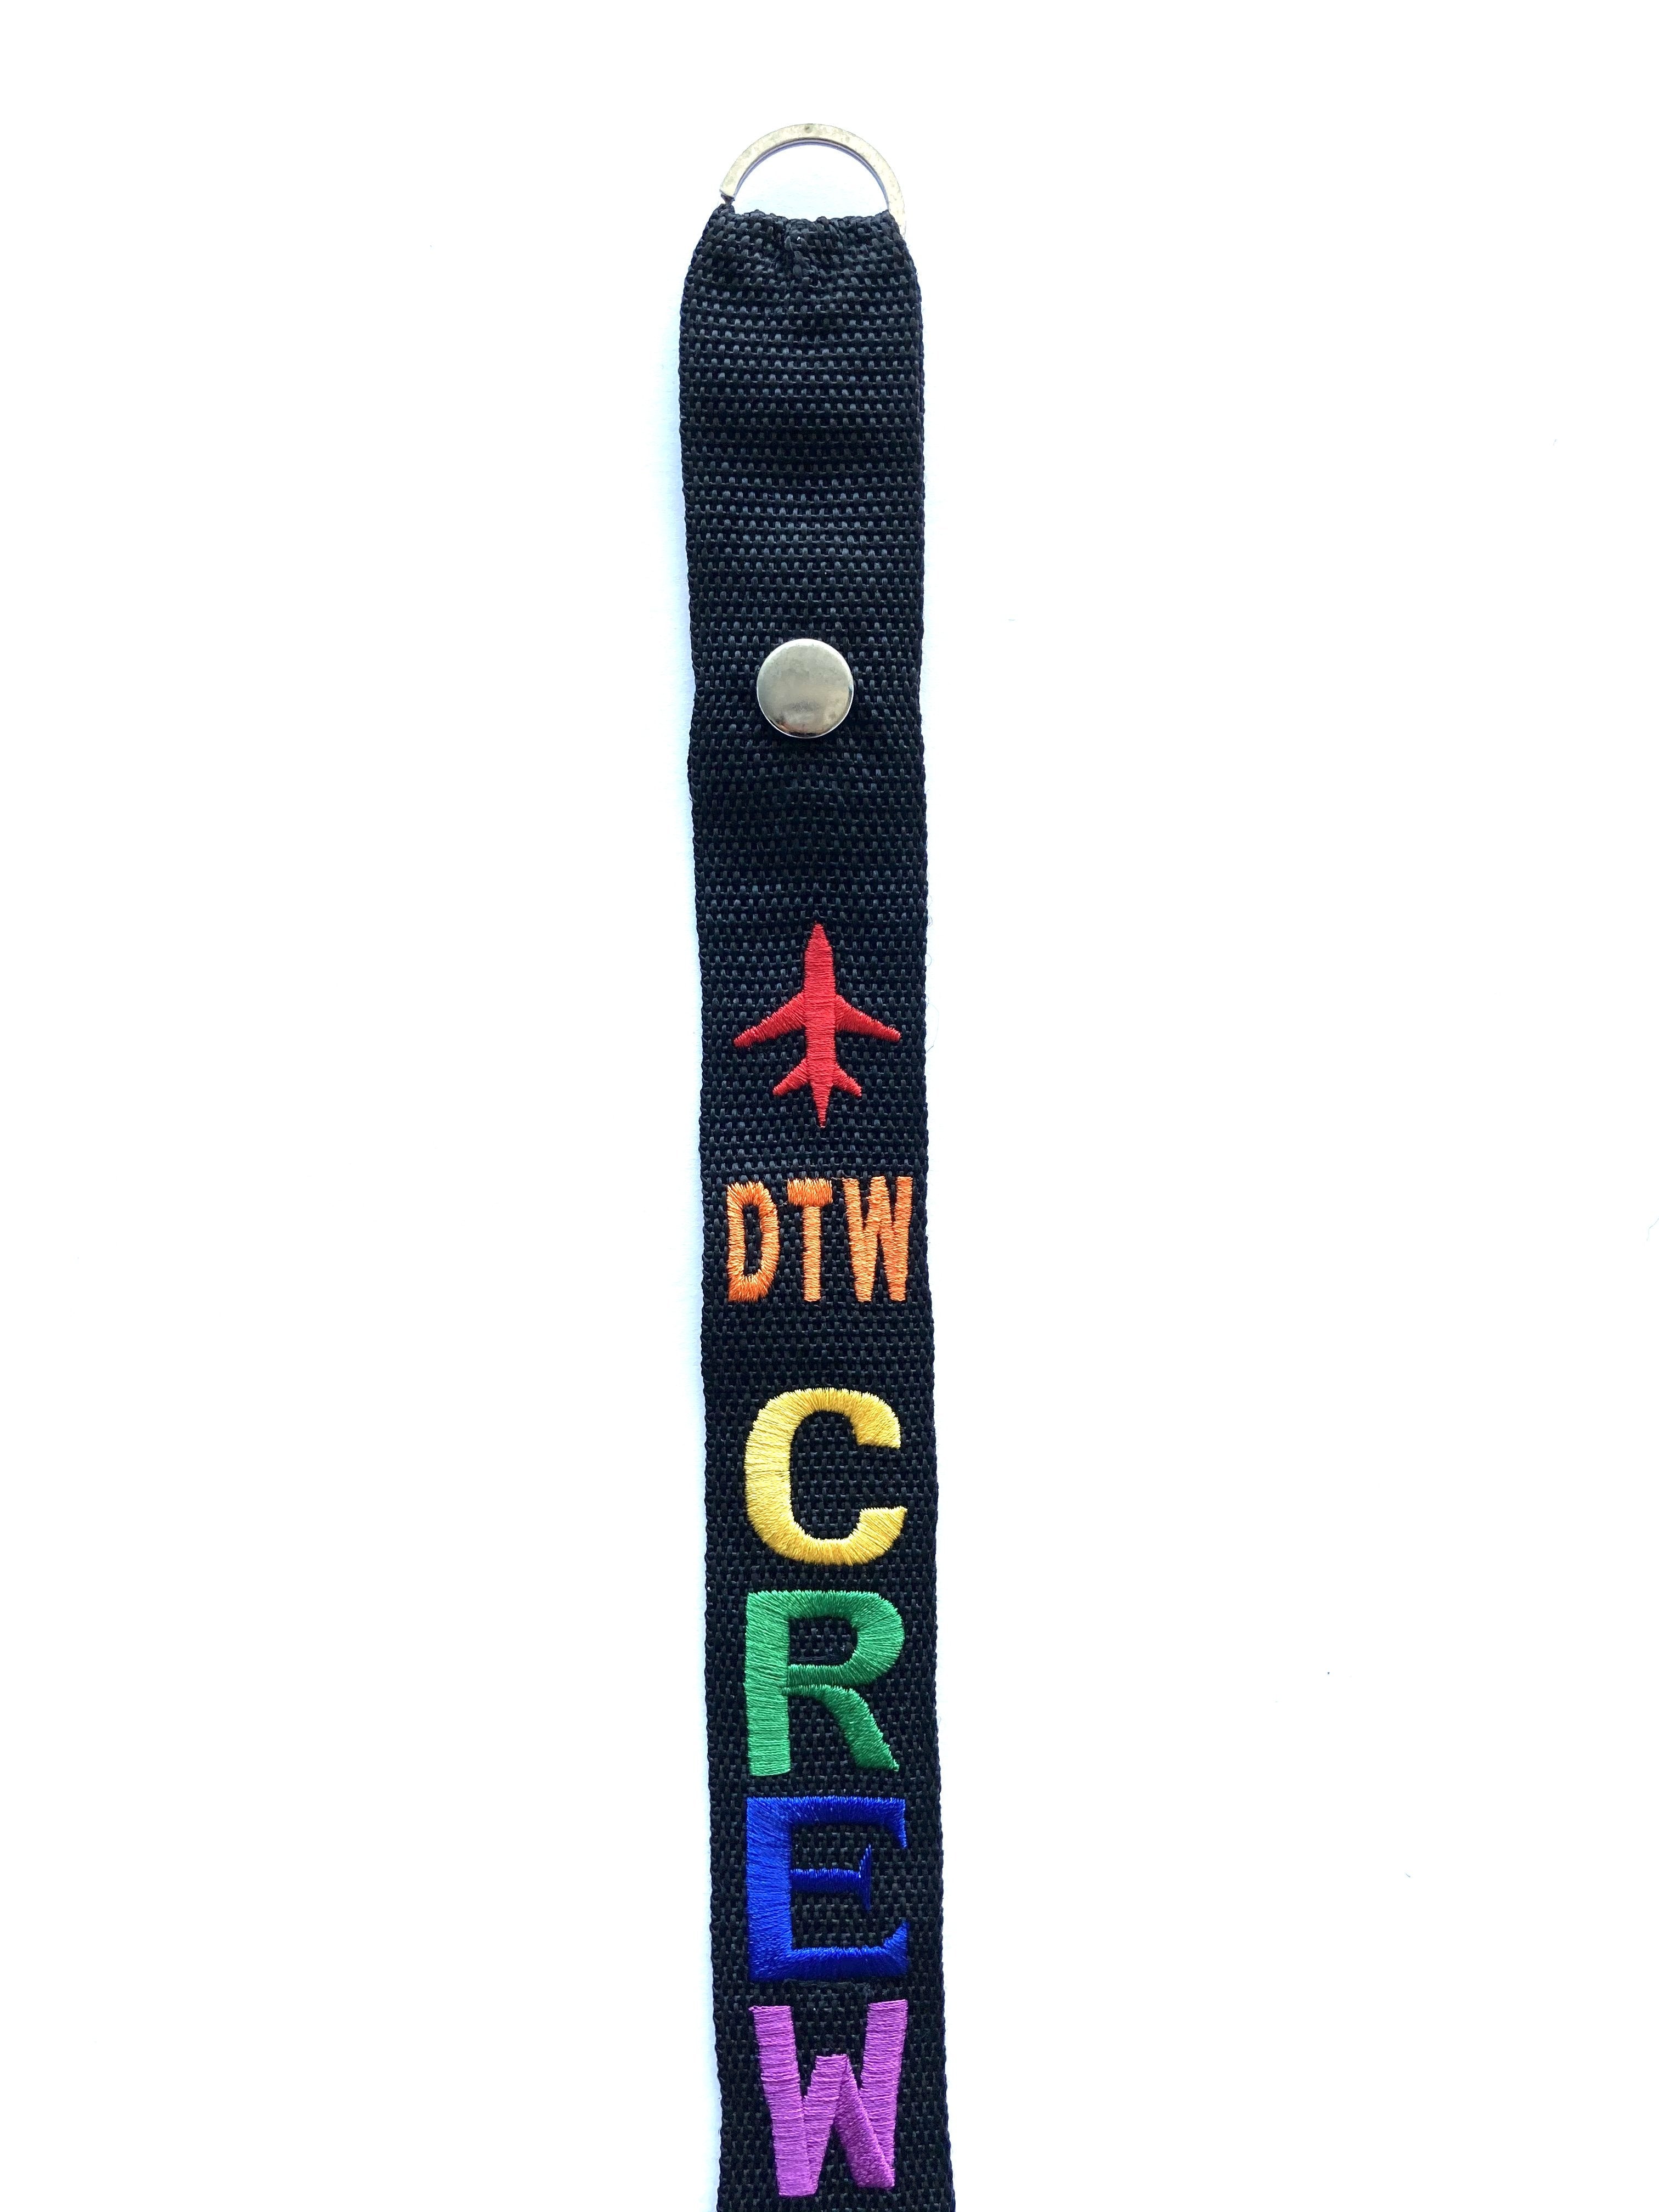 CREW Luggage Tag - DTW Pride